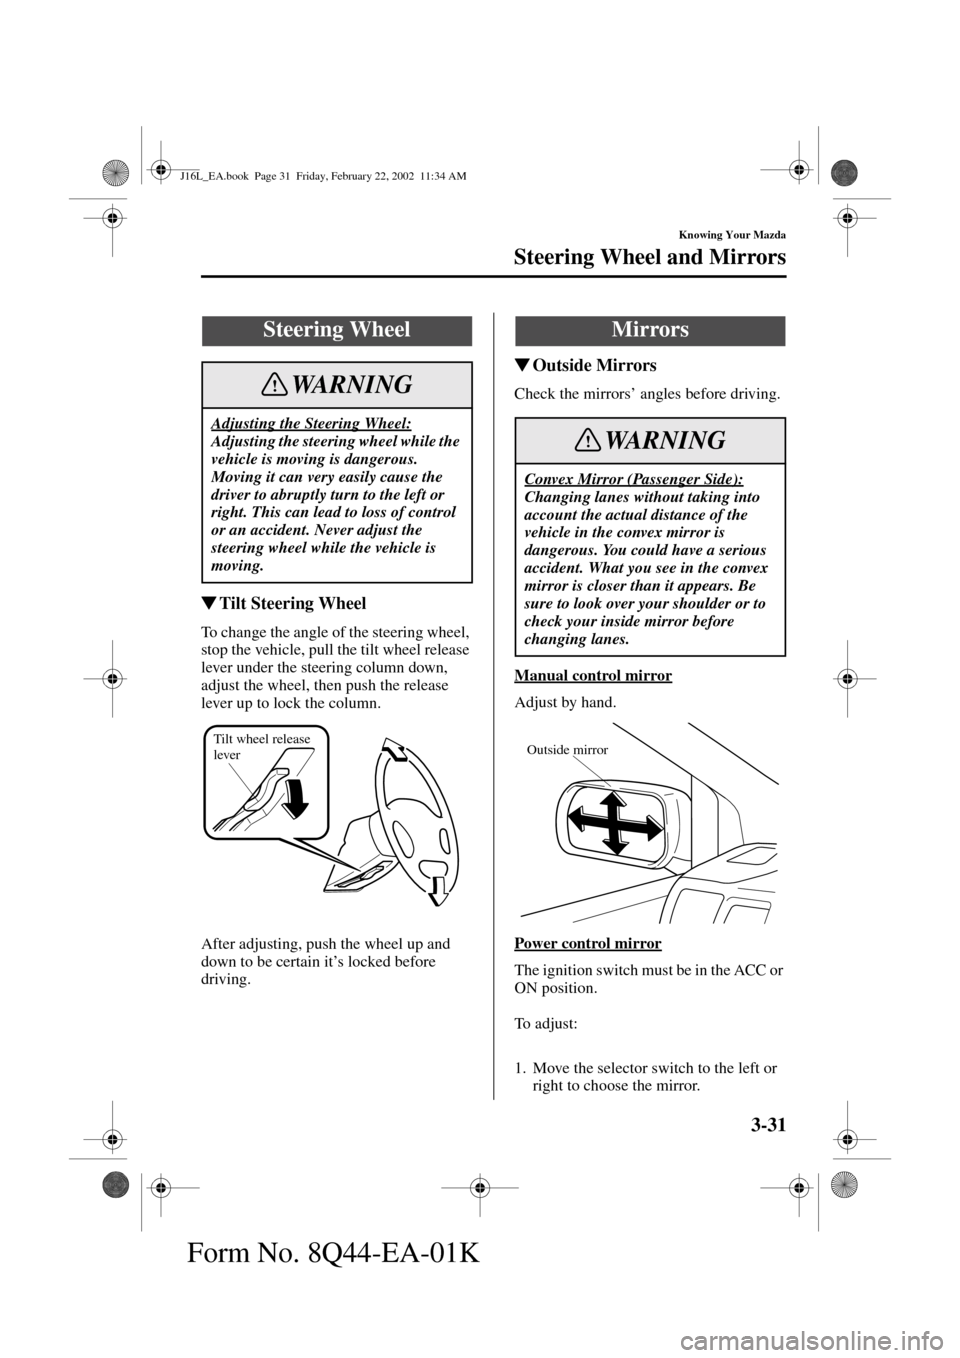 MAZDA MODEL MPV 2002  Owners Manual (in English) 3-31
Knowing Your Mazda
Form No. 8Q44-EA-01K
Steering Wheel and Mirrors
Tilt Steering Wheel
To change the angle of the steering wheel, 
stop the vehicle, pull the tilt wheel release 
lever under the 